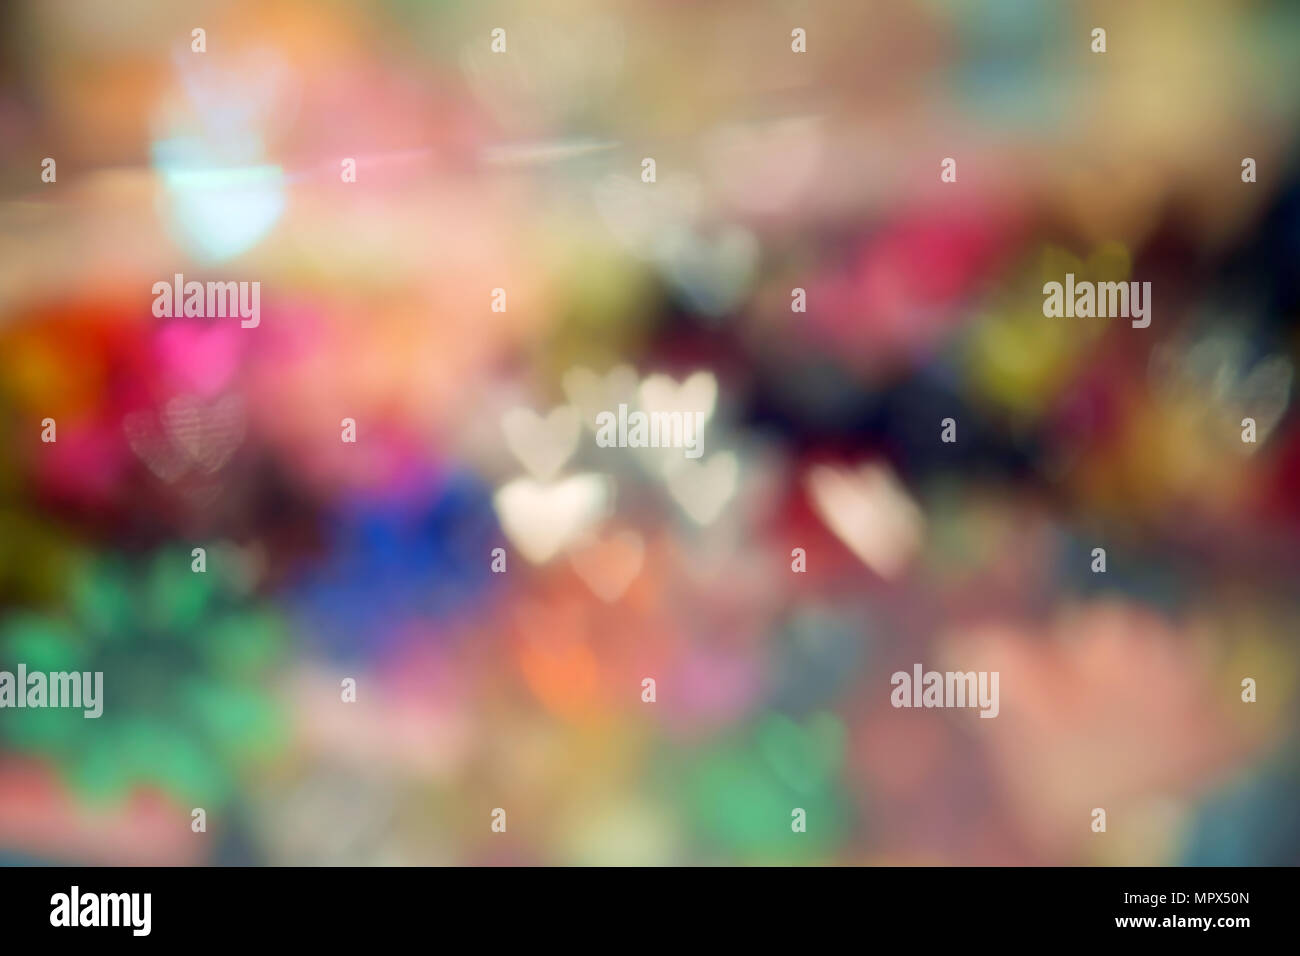 Colorful abstract blur background with heart shaped. Stock Photo